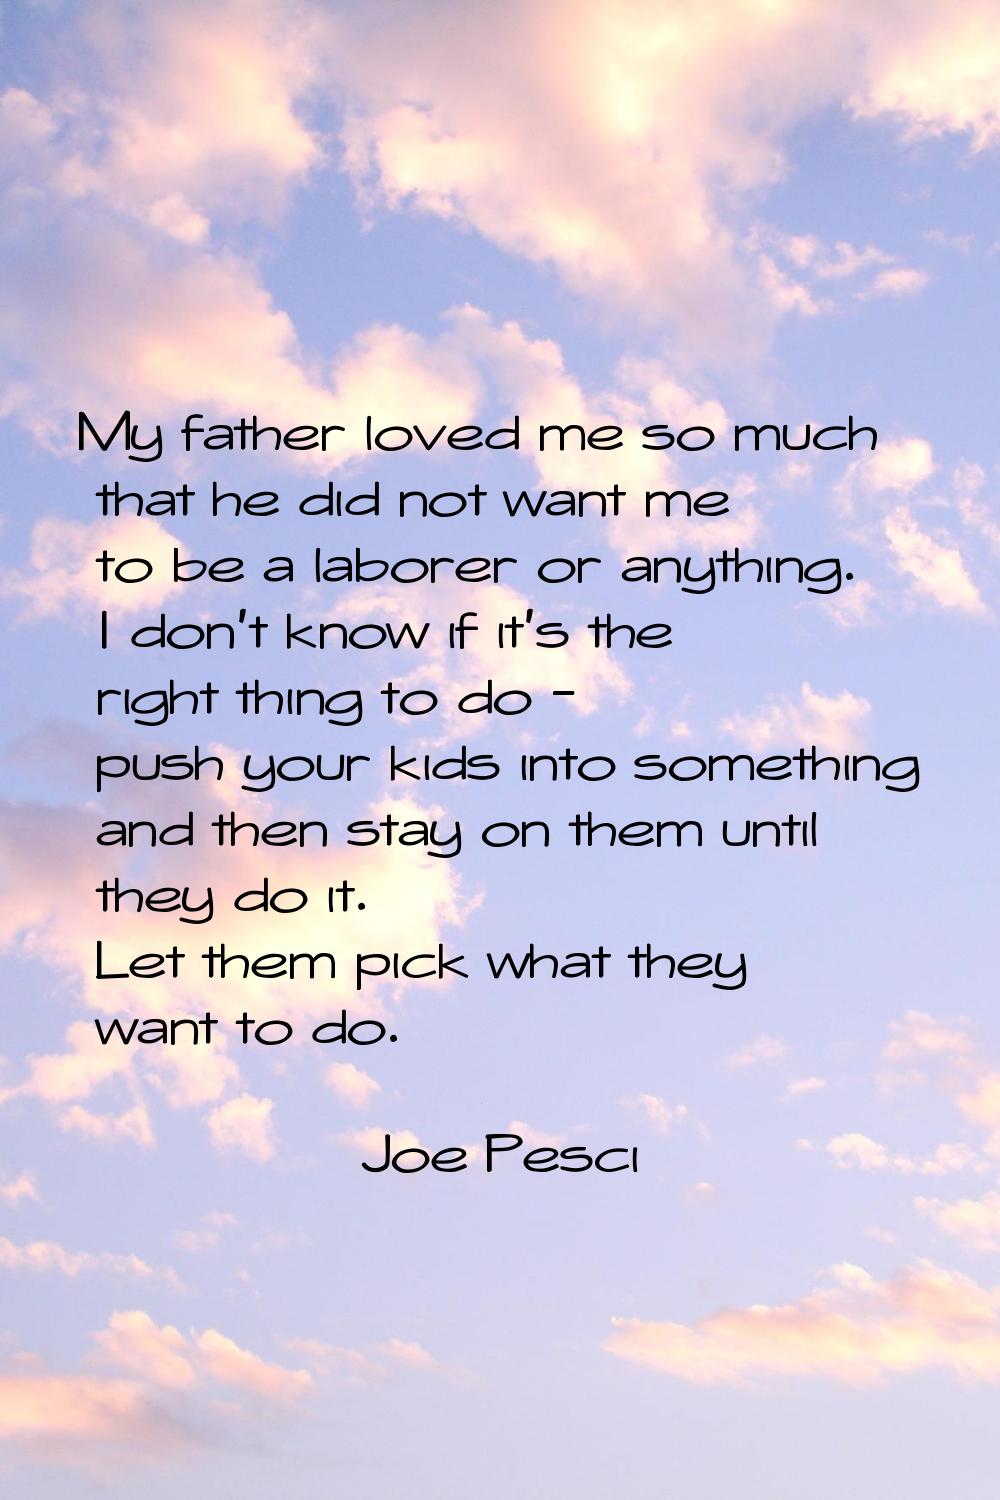 My father loved me so much that he did not want me to be a laborer or anything. I don't know if it'